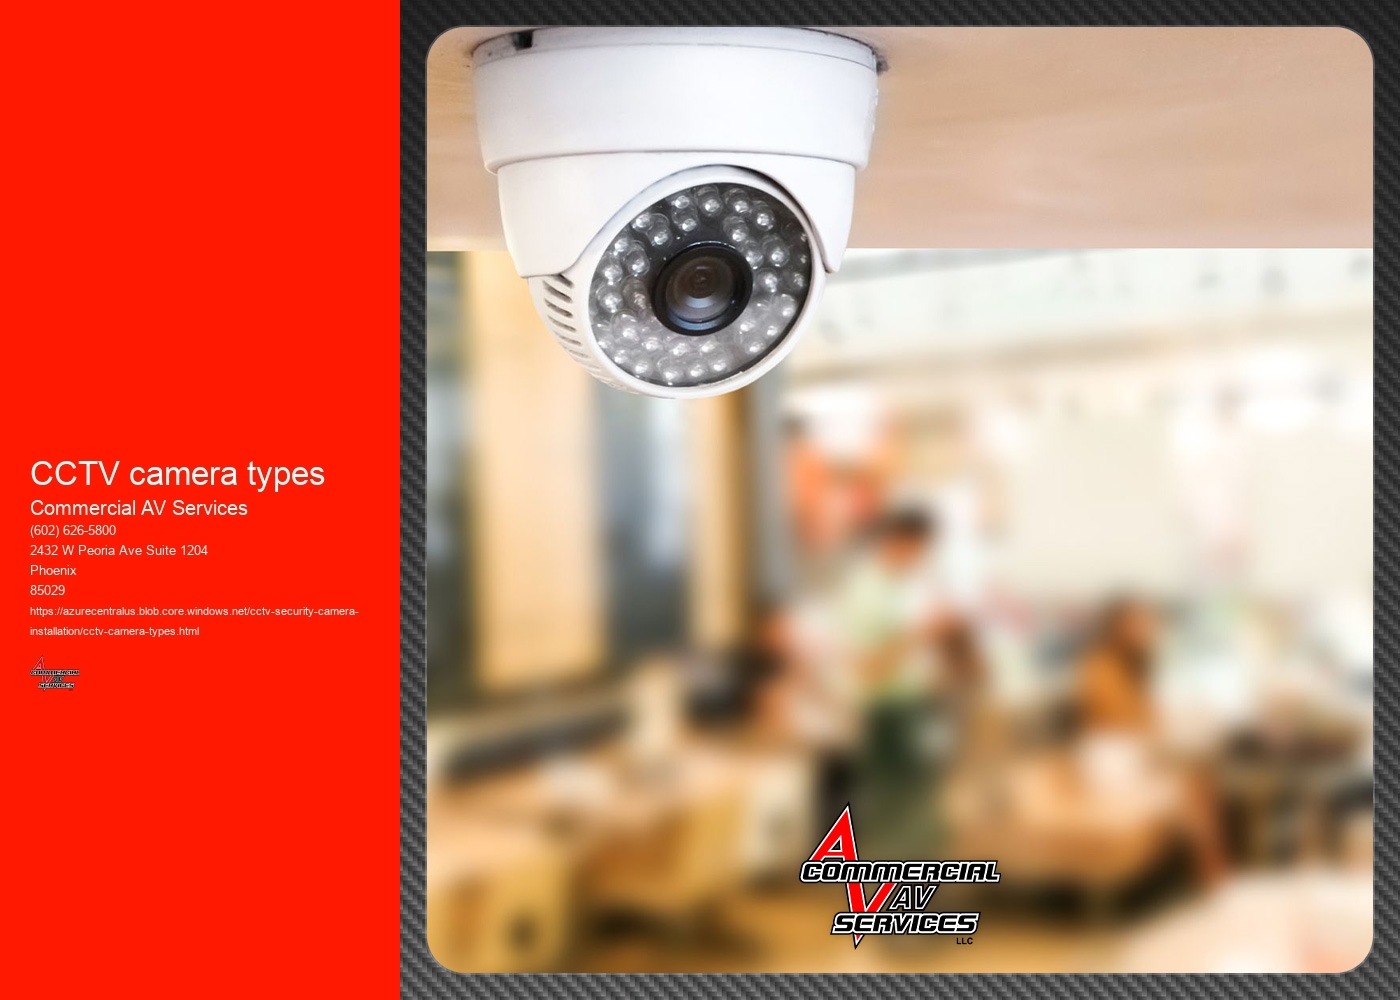 What are the main differences between bullet and dome CCTV cameras, and how do they impact their suitability for specific surveillance needs?